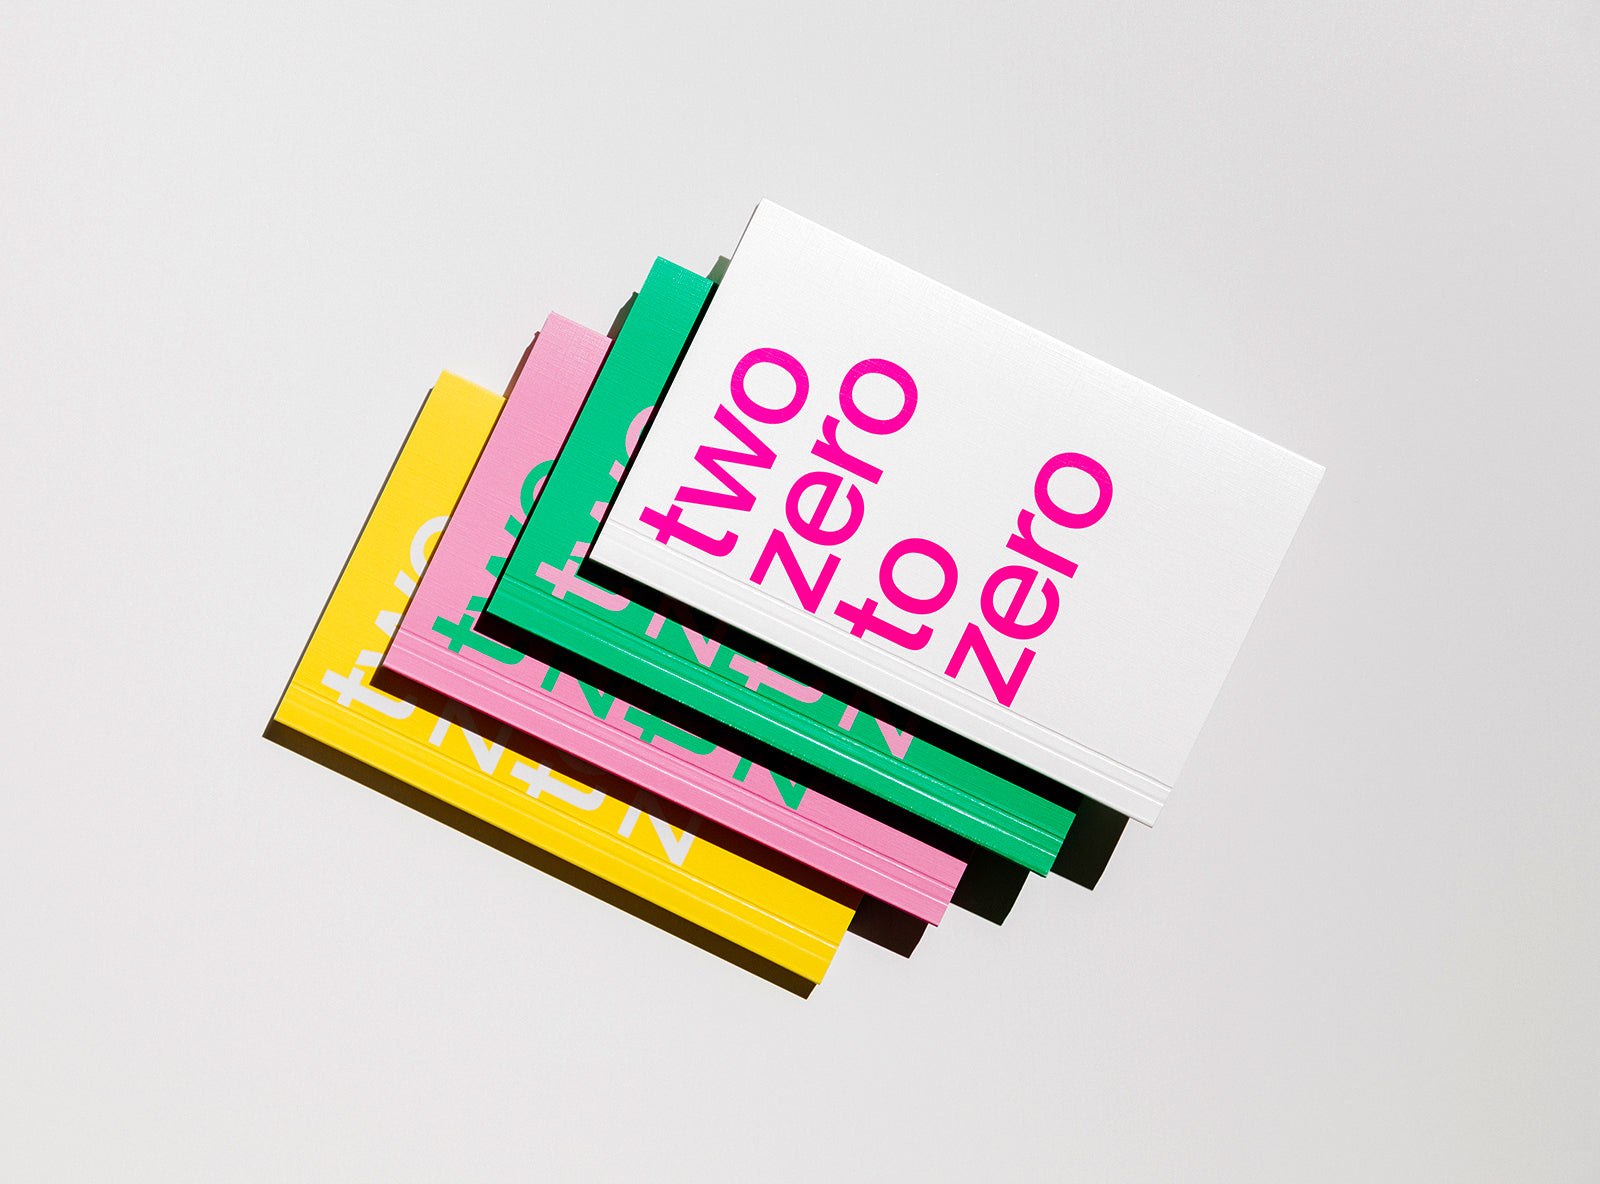 All covers from our 2020 planner, in white, green, pink and yellow.